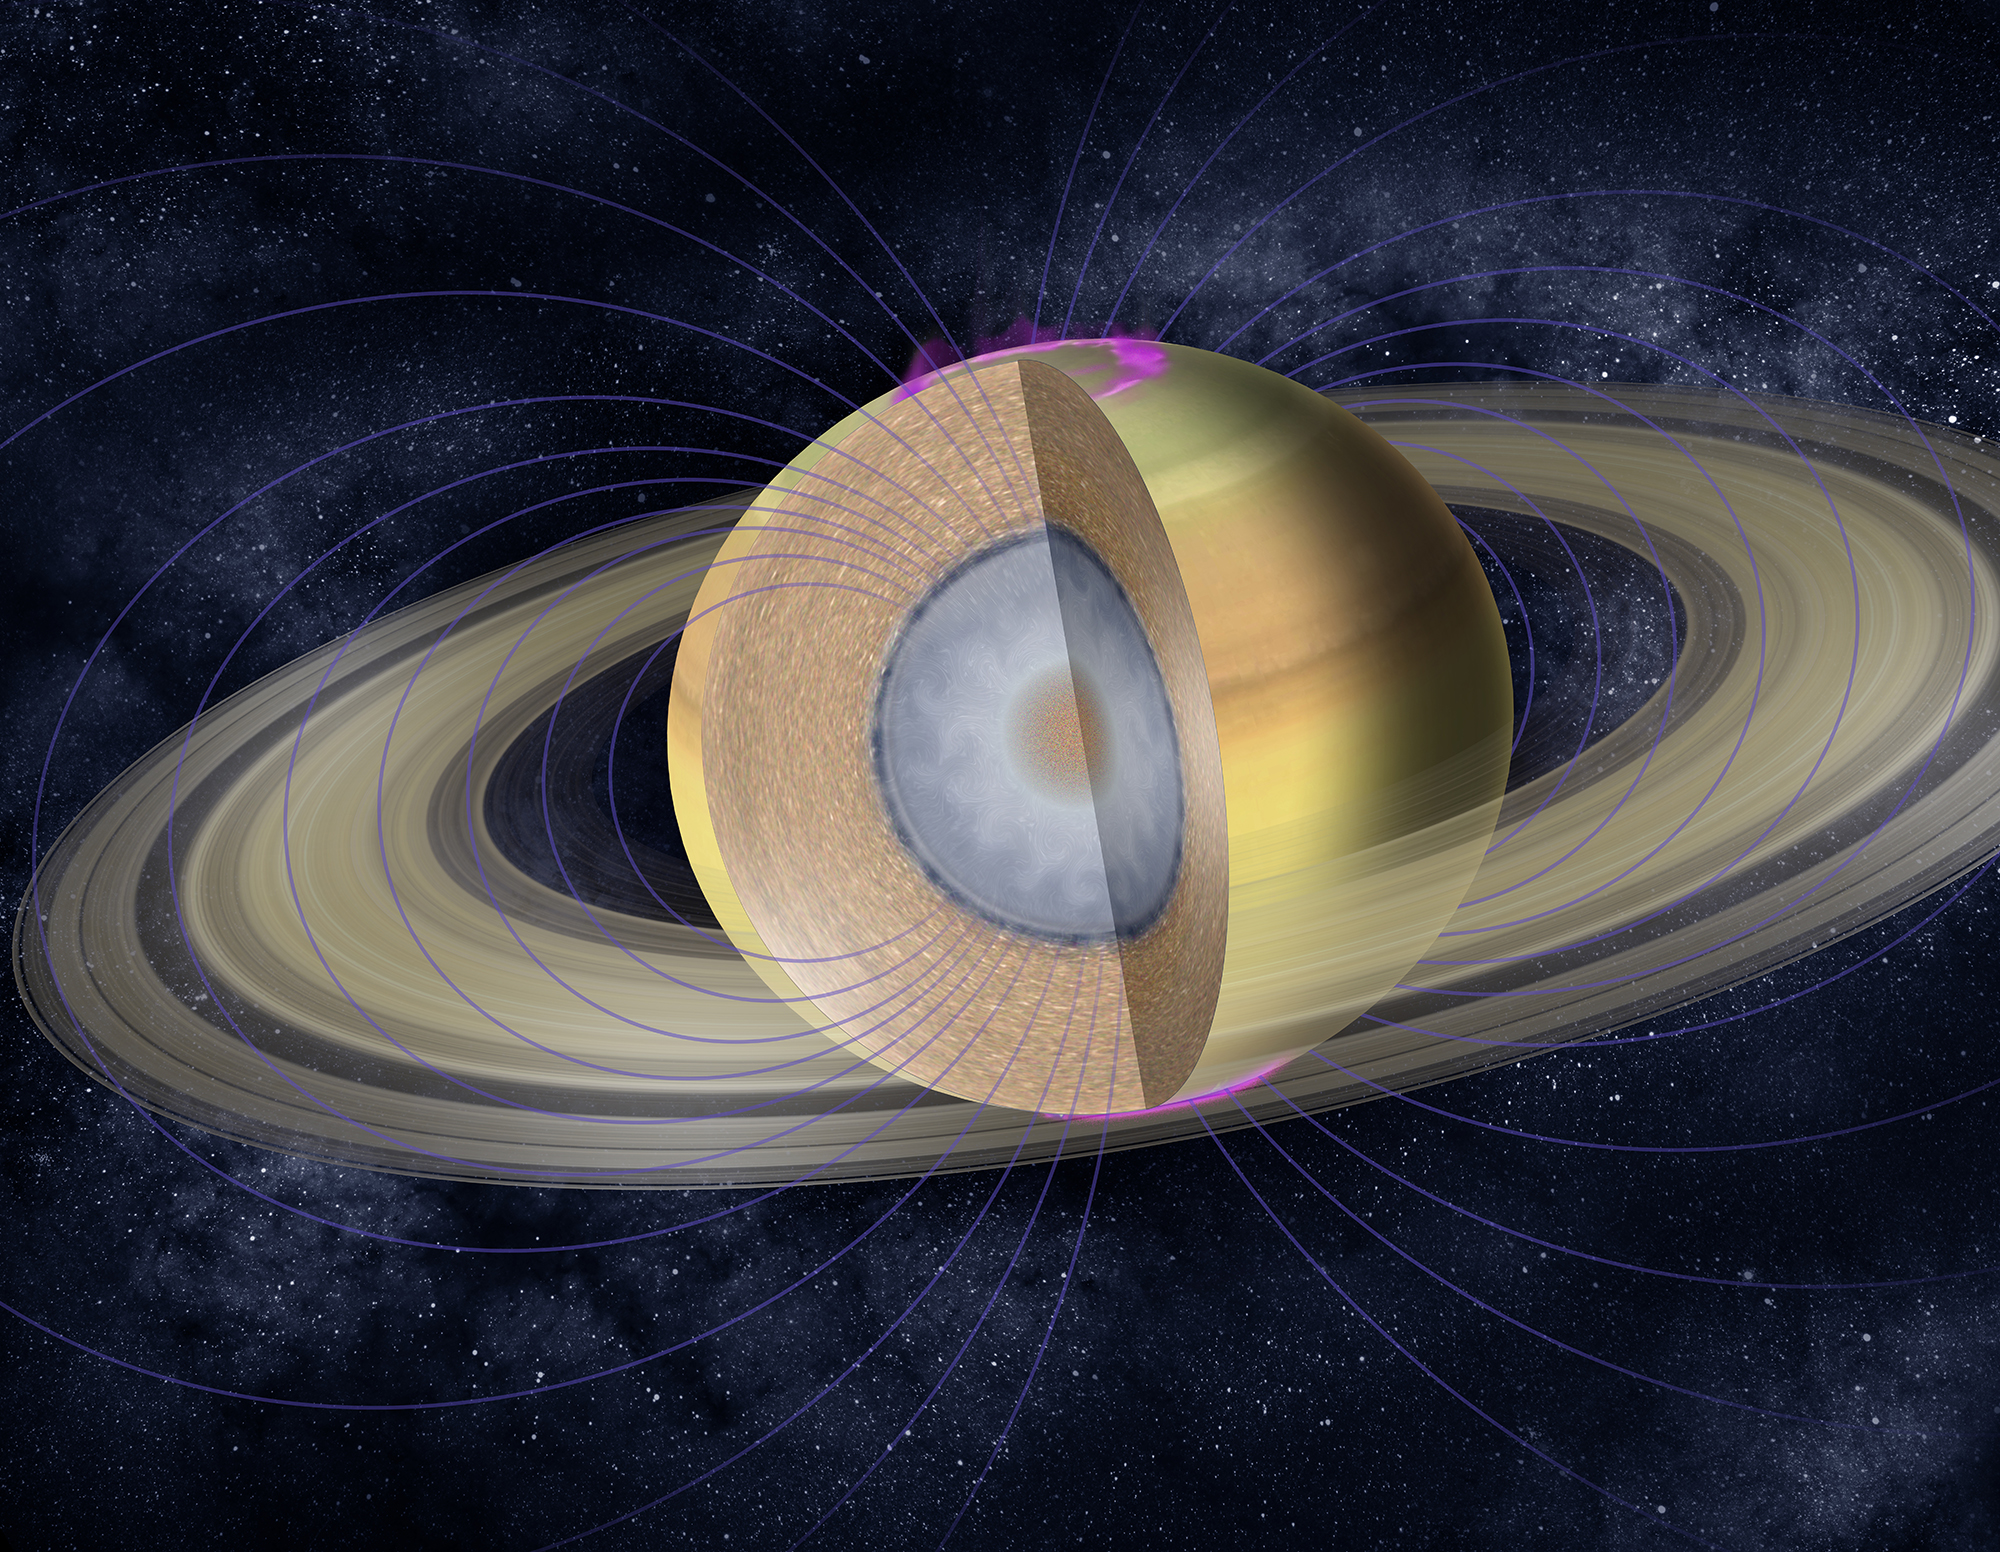 Illustration showing the layers of gas and a possible core inside Saturn.